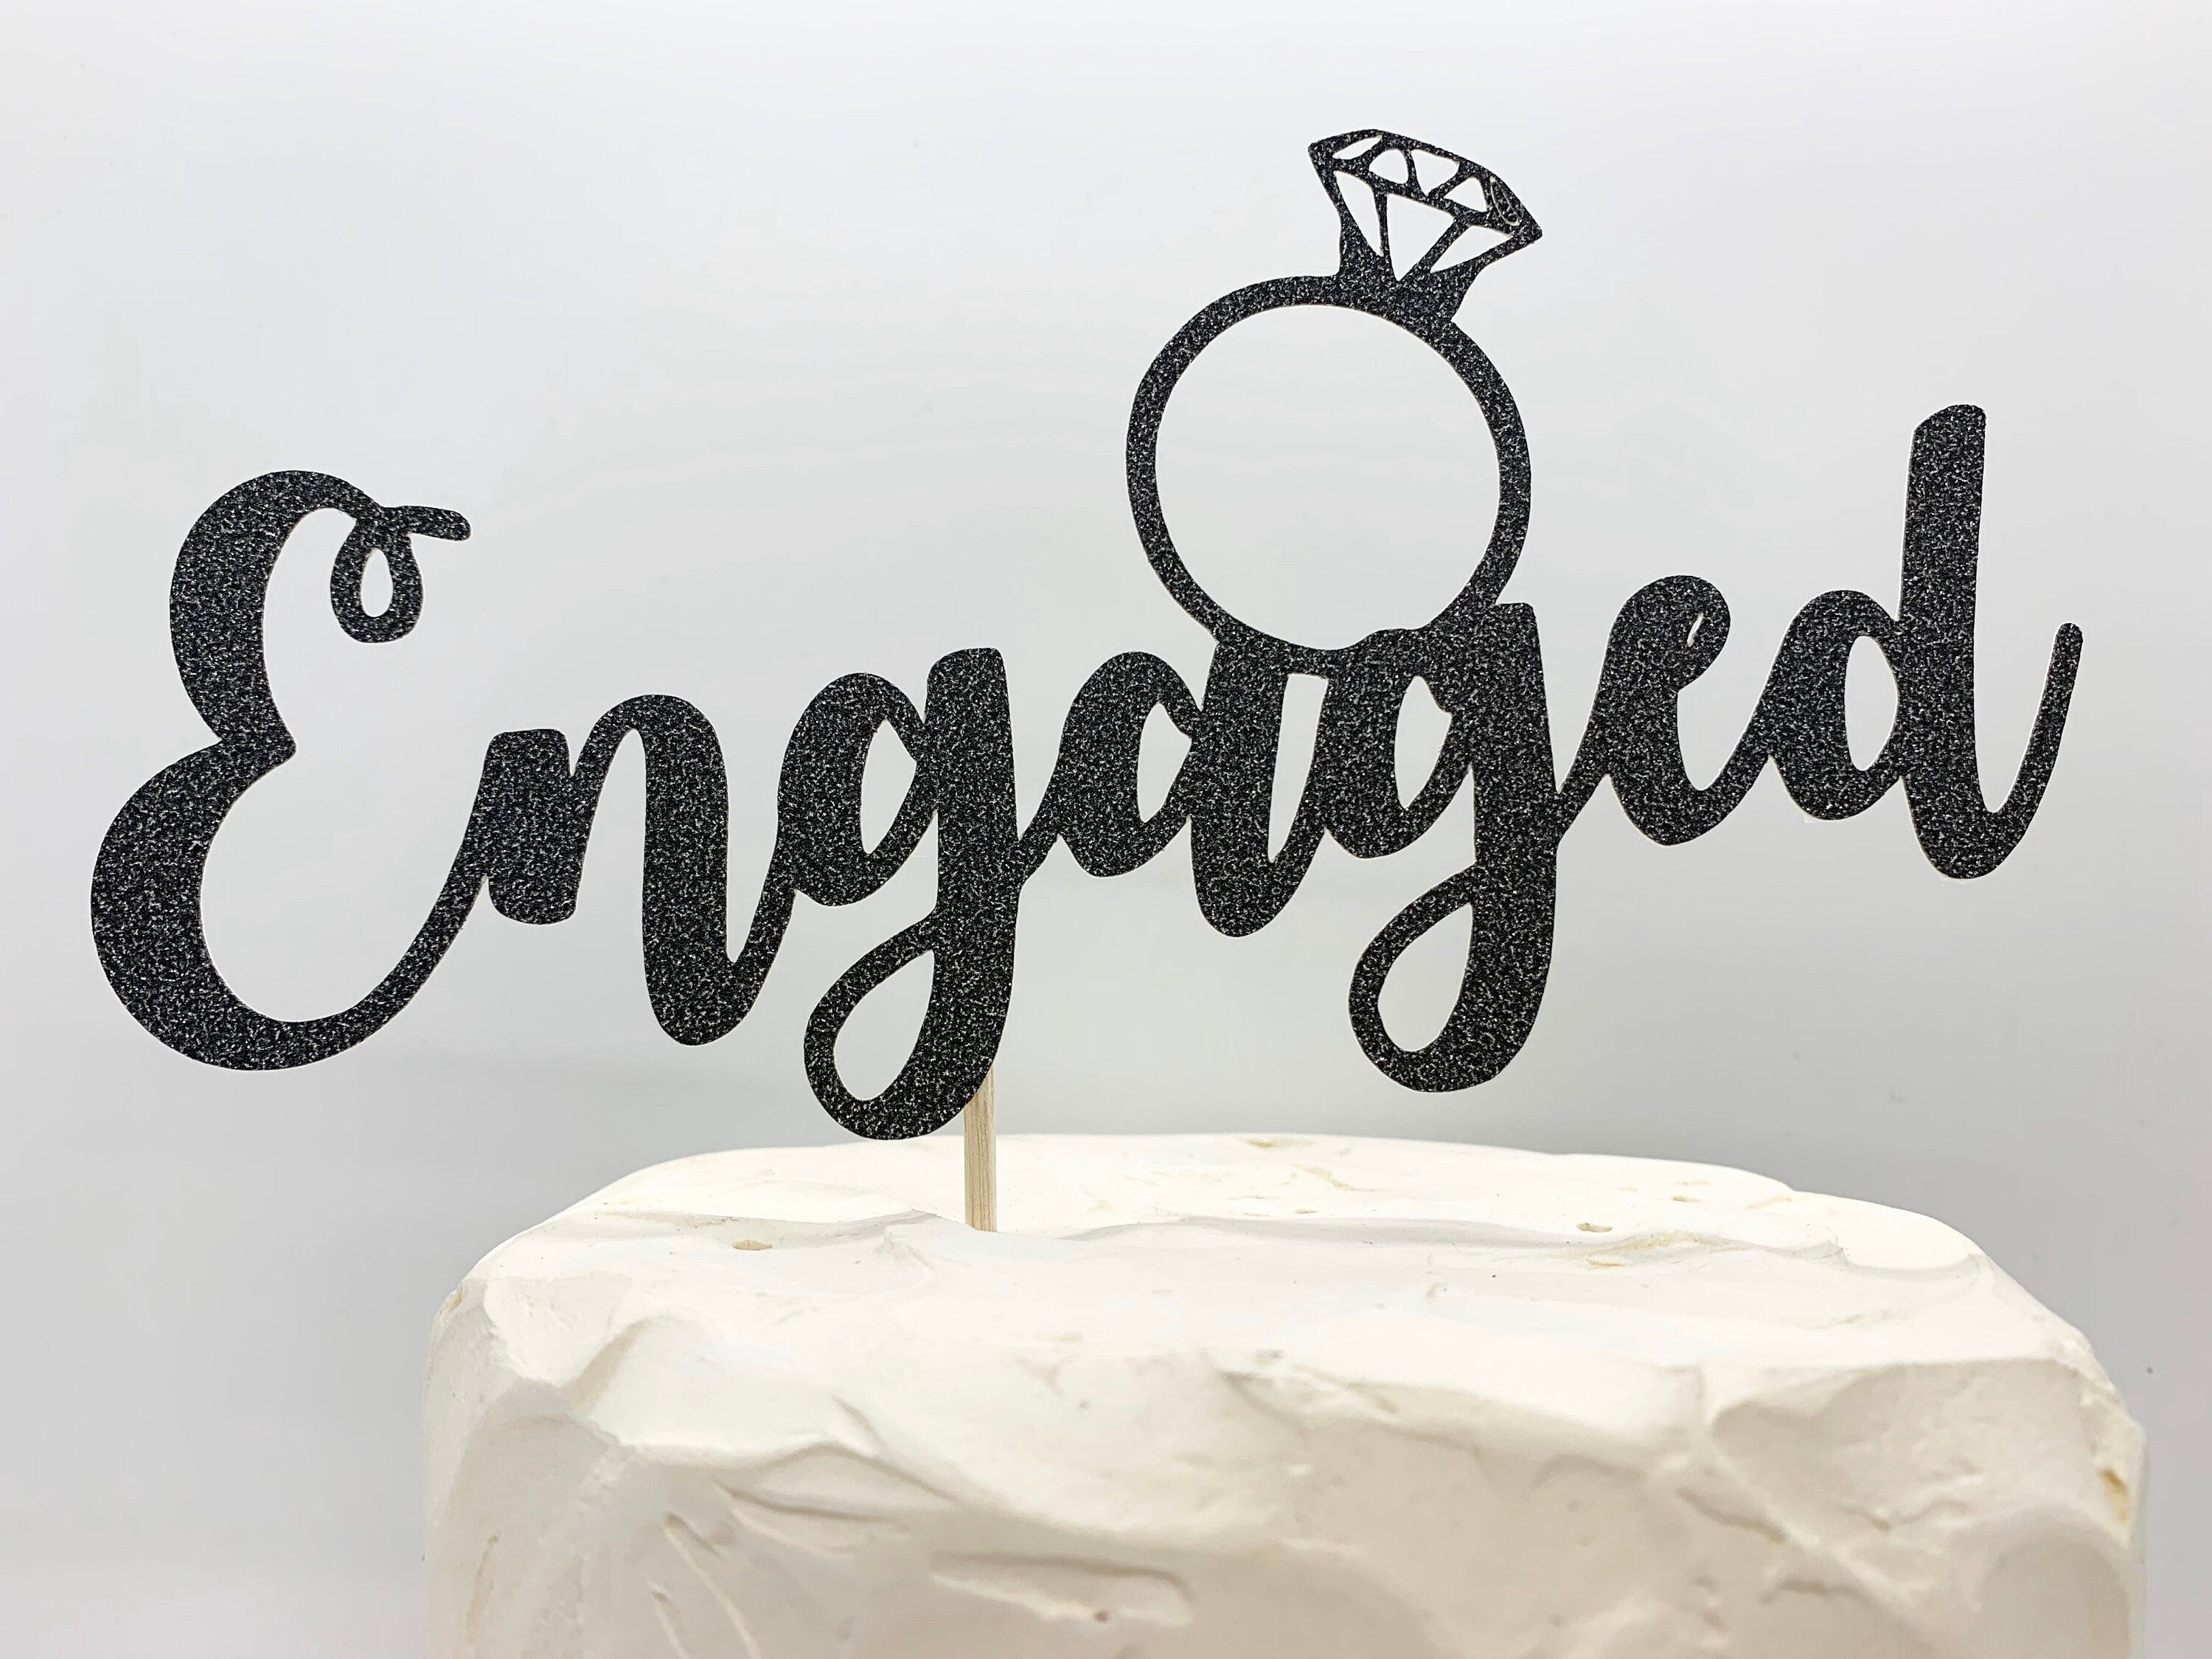 Engaged Cake Topper